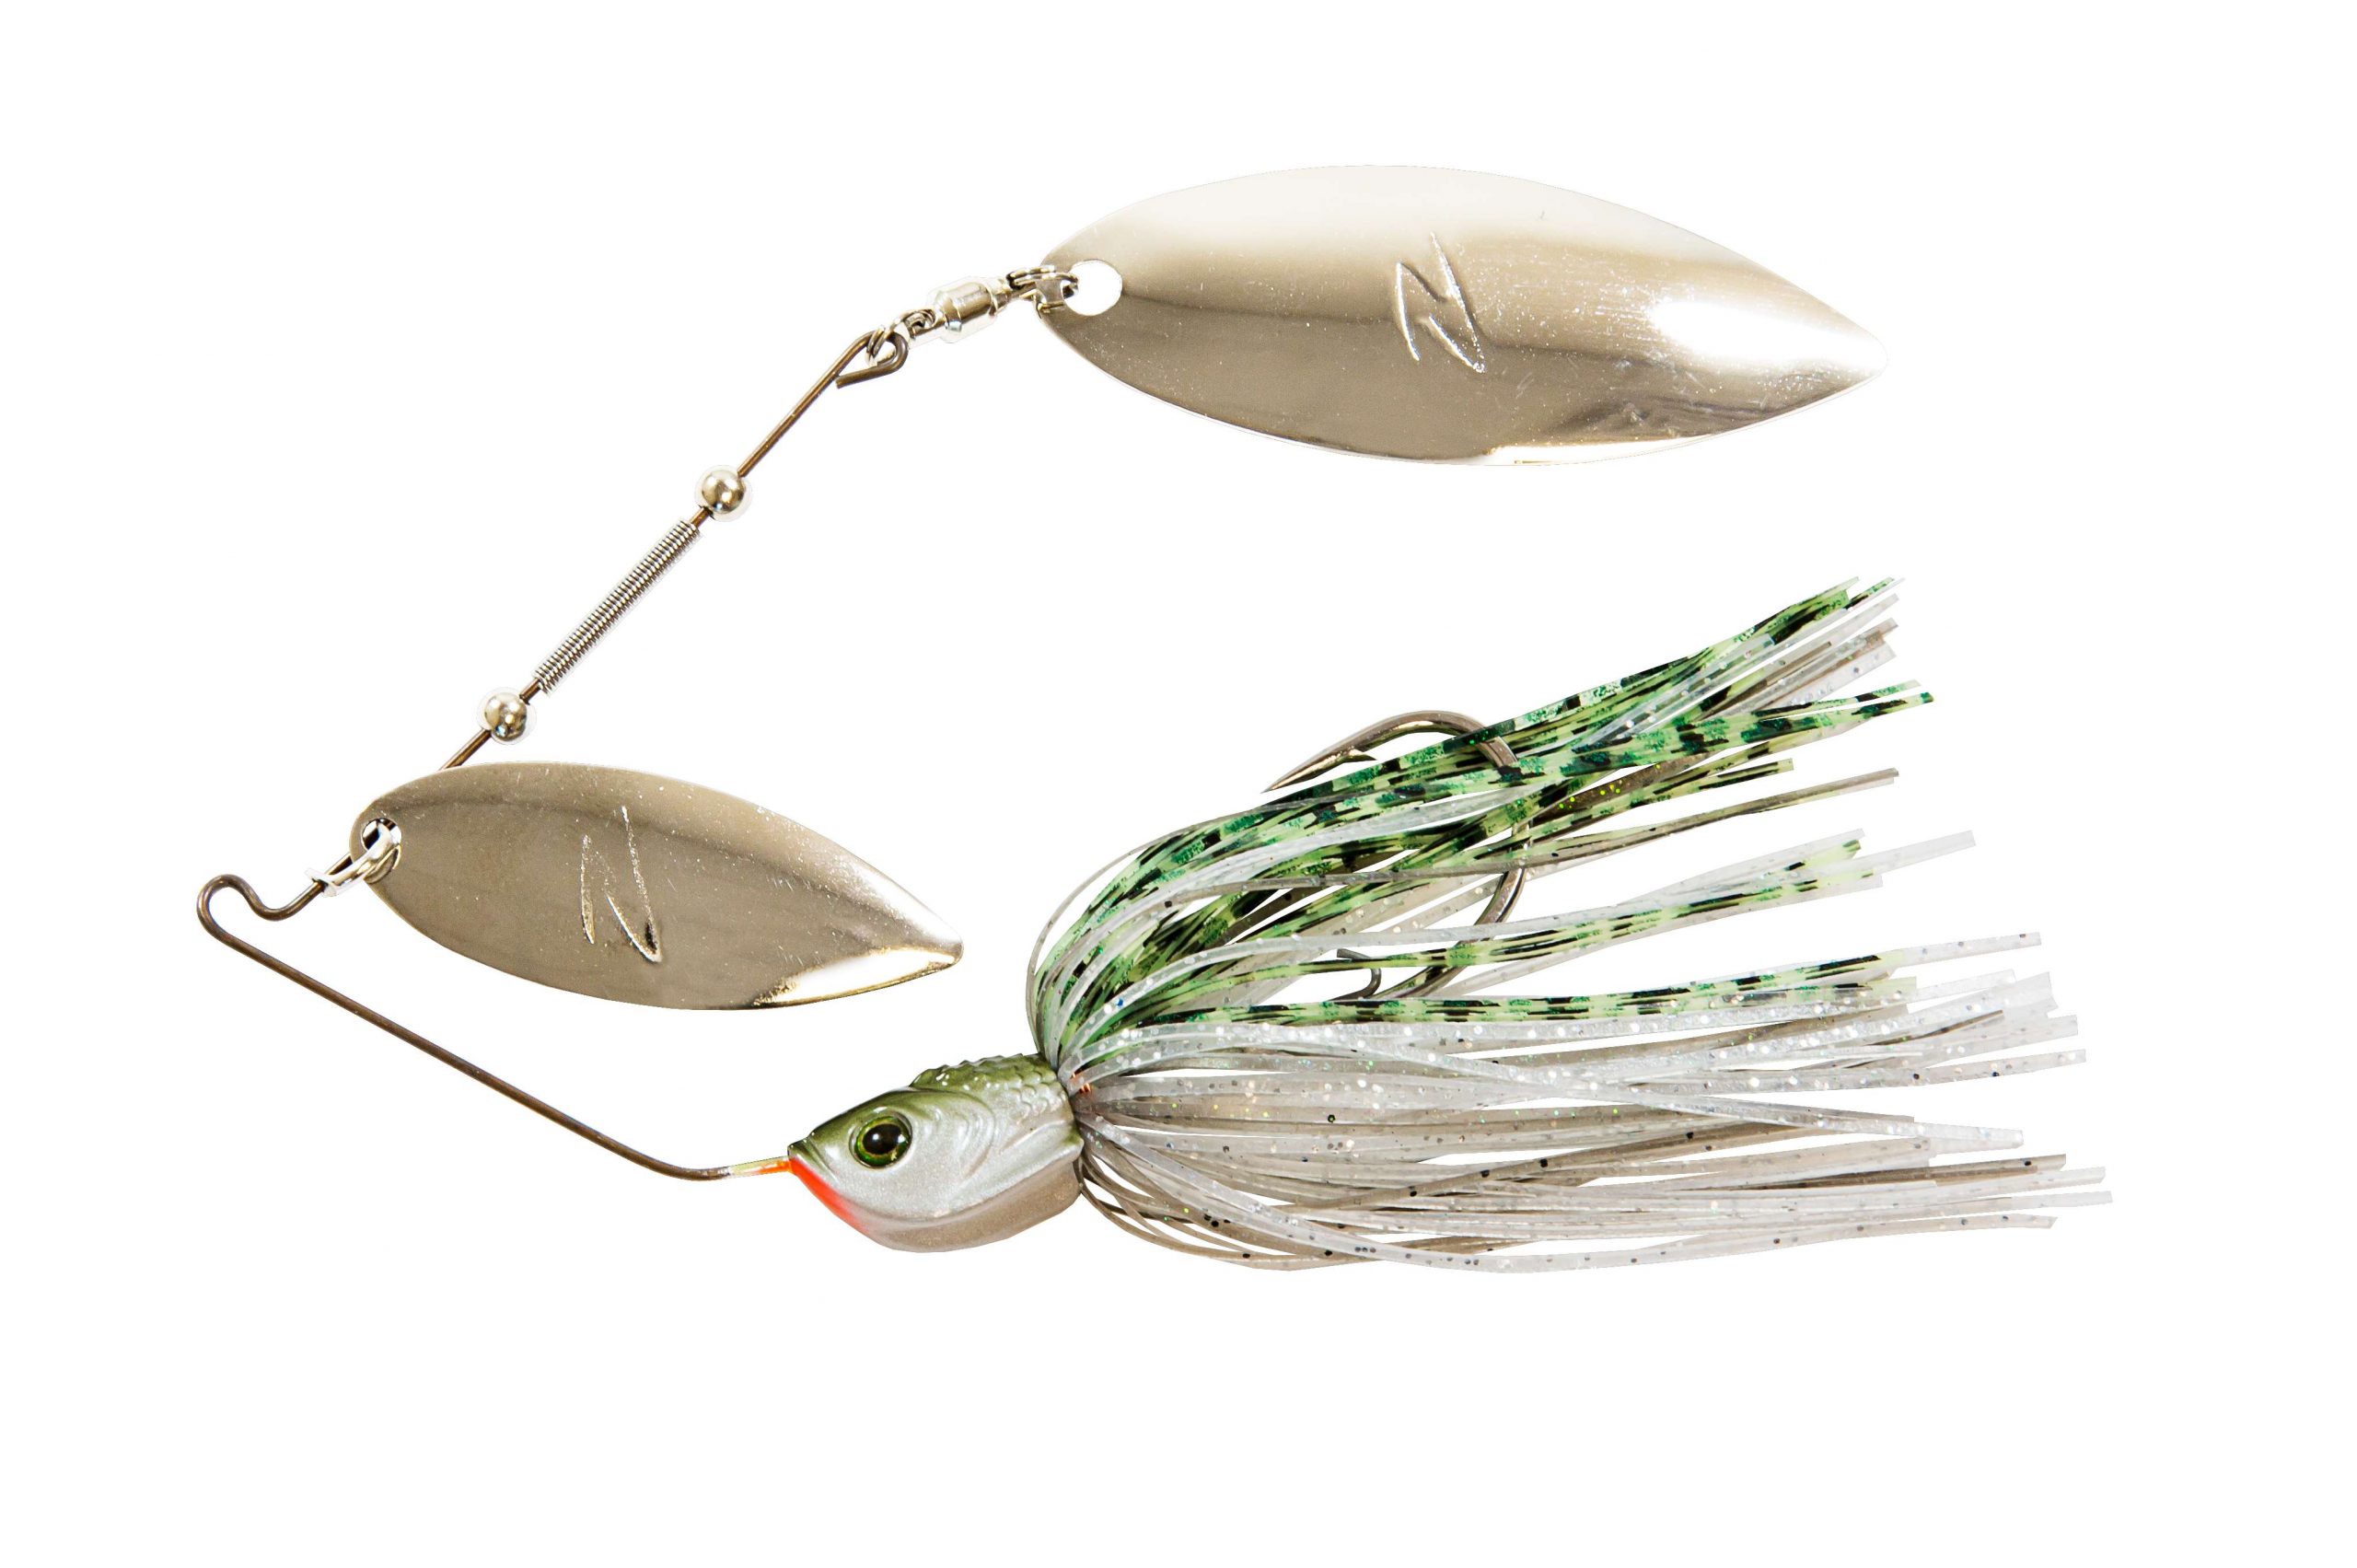  Tackle HD Warrior Spinnerbait/Buzzbait Skirts 3-Pack